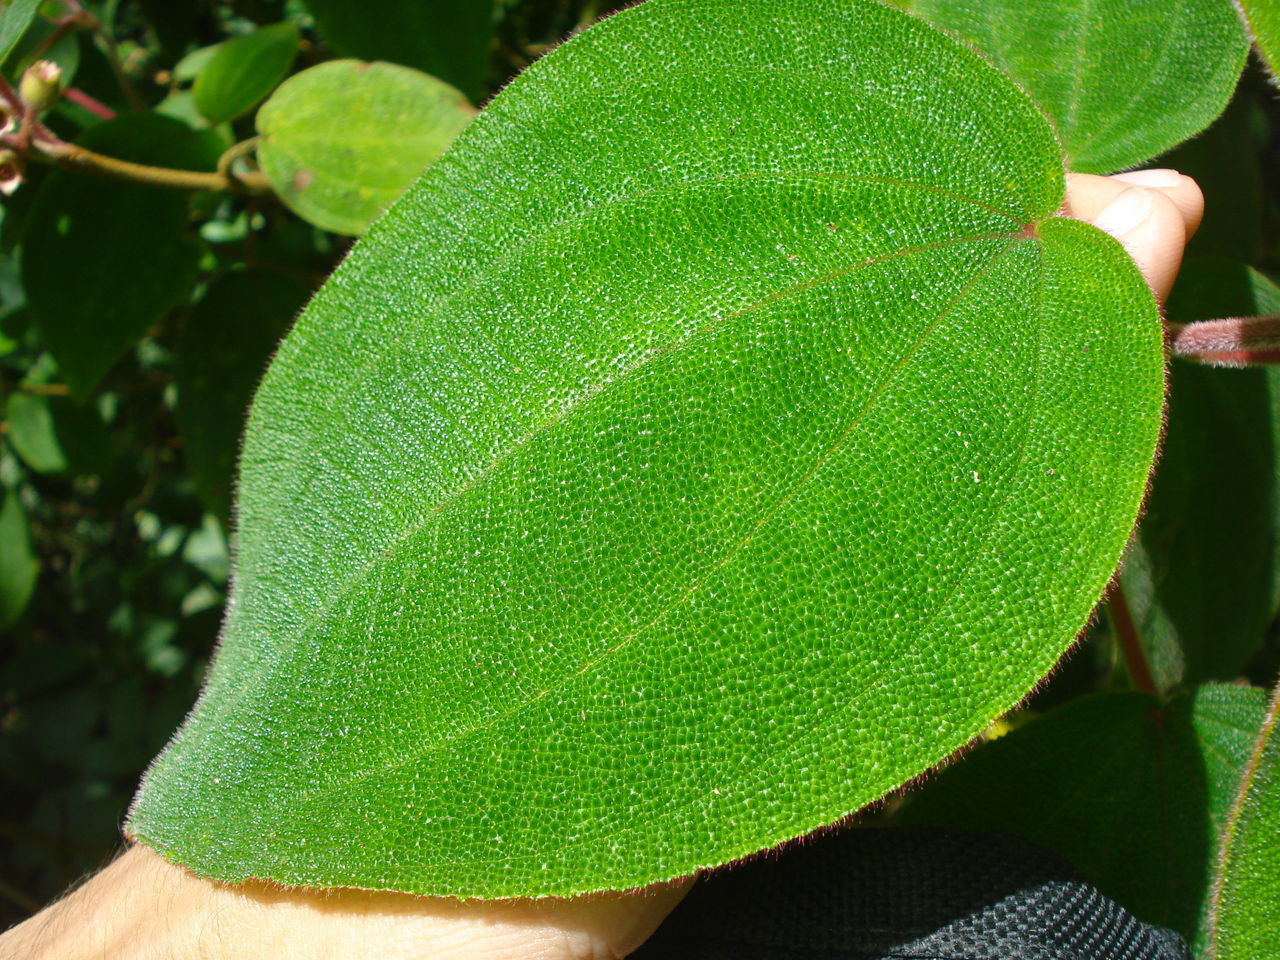 CLOSE-UP OF GREEN HAND